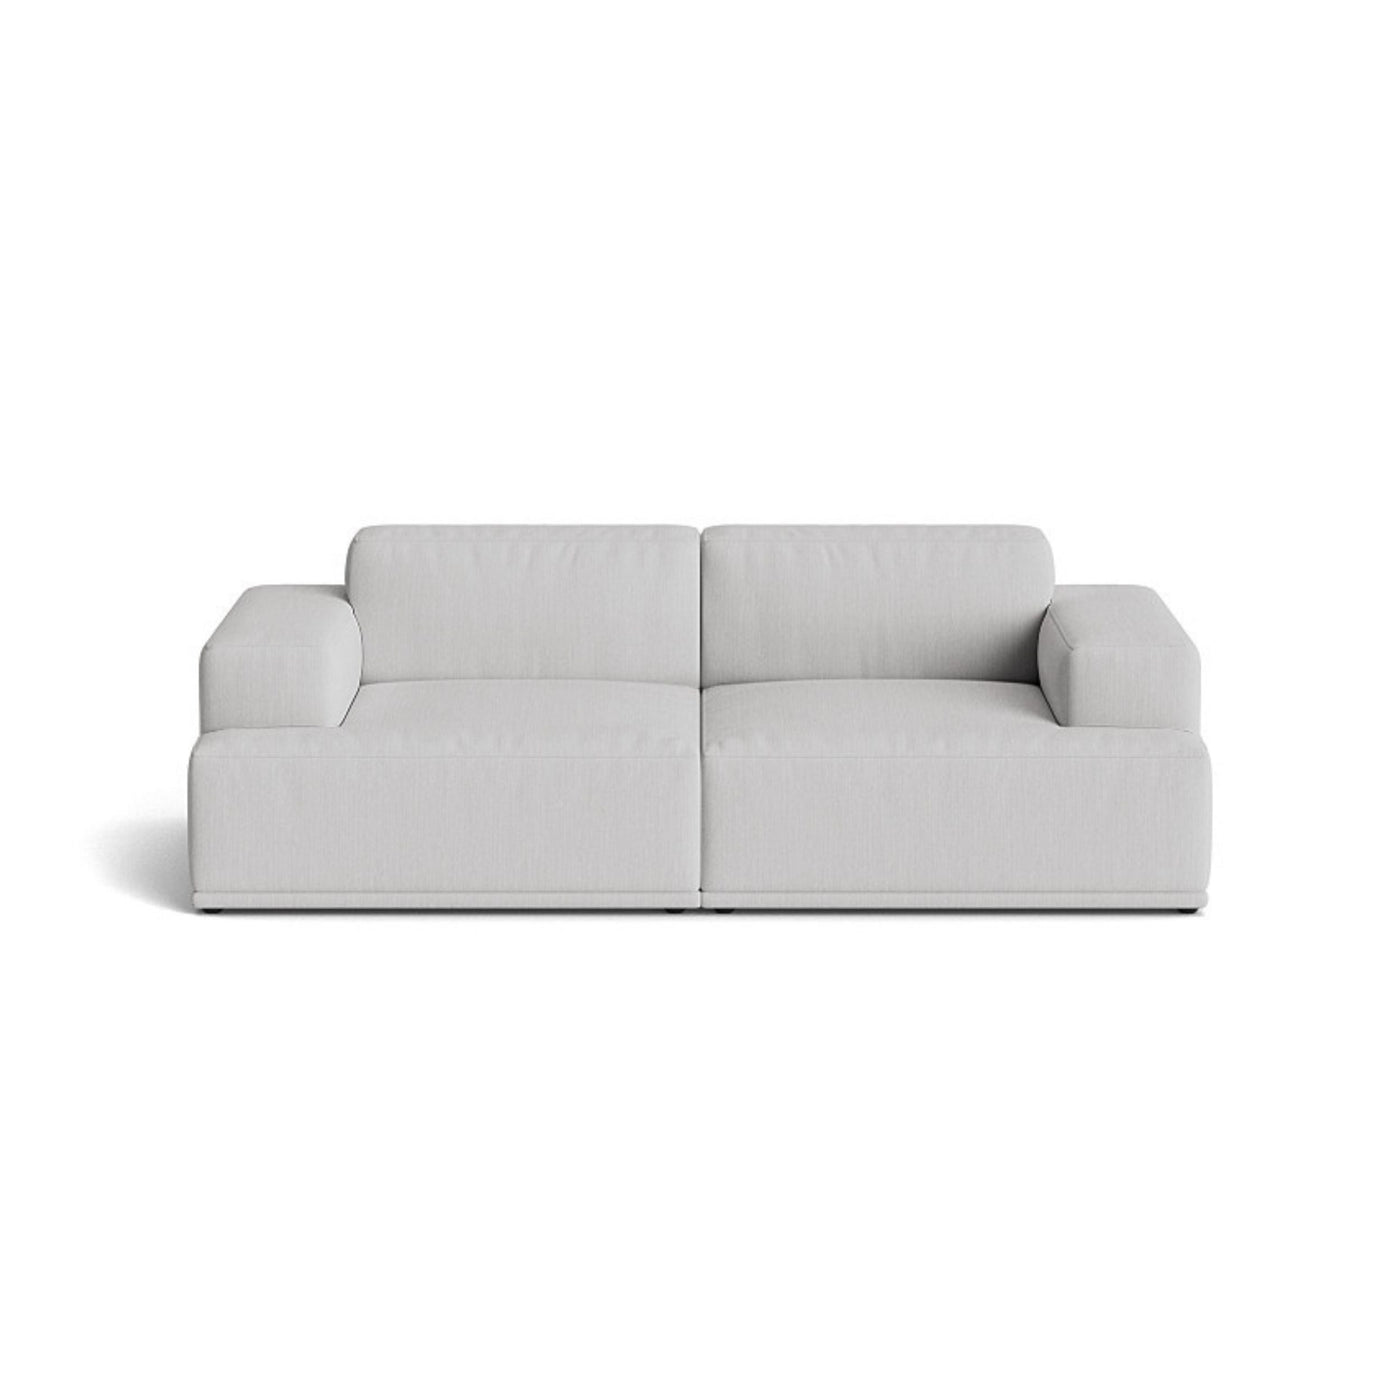 Muuto Connect Soft Modular 2 Seater Sofa, configuration 1. made-to-order from someday designs. #colour_balder-132